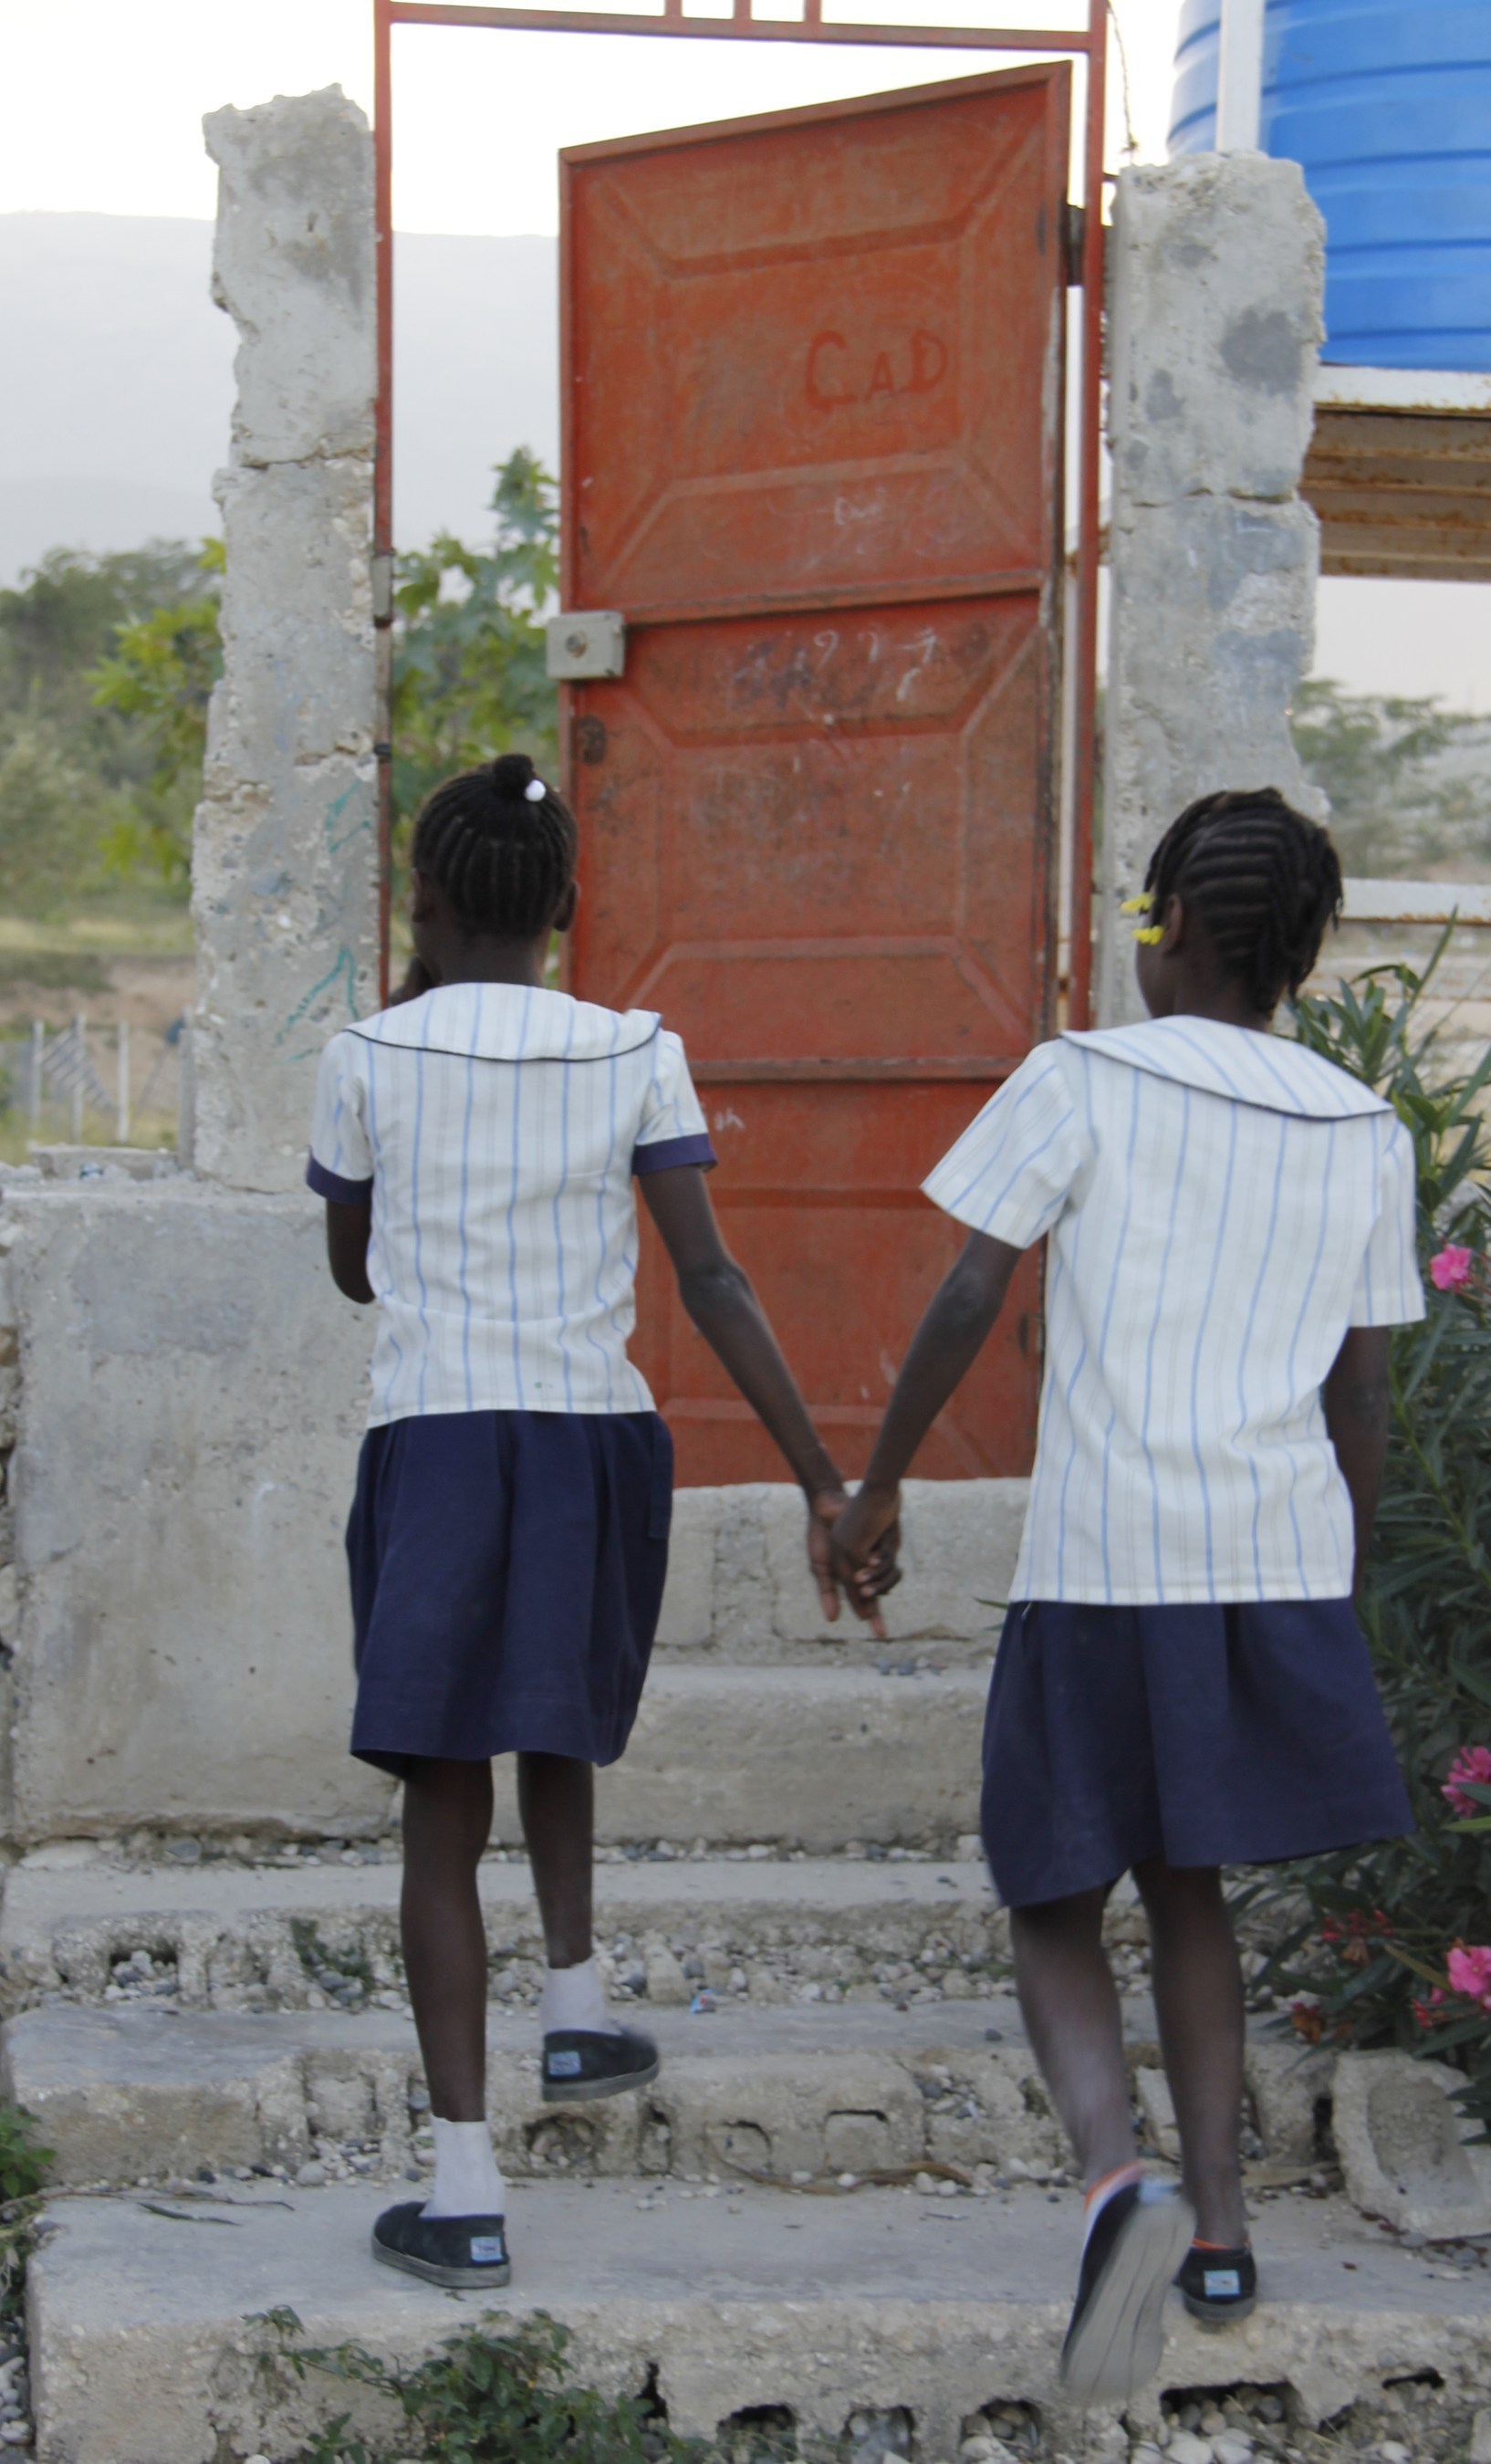 Mary* and Jeanine*, both 12, are best friends and are currently living in a center for vulnerable children in Haiti. This foster care center looks after orphans, former street children and former domestic servants, providing them with shelter, food, health care, education, and life-skills training. The center also assists in reuniting them with their families when possible. Photo by Sarah Tyler/Save the Children (* after a name indicates that the name has been changed to protect identity. This must be ...